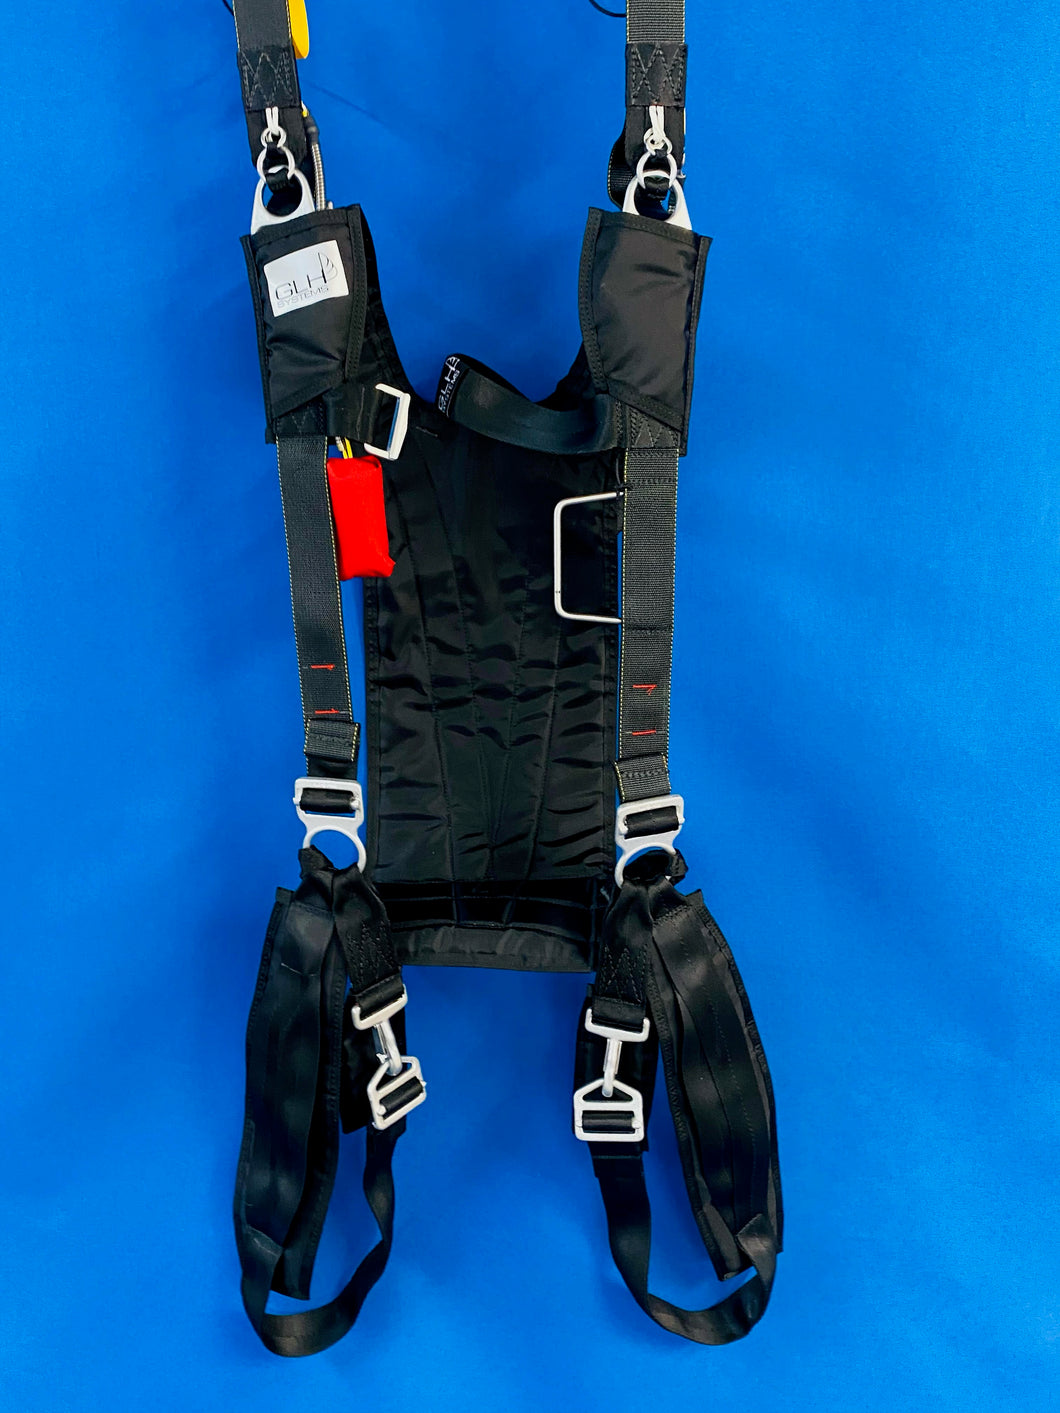 Skydive Training Harness: Optimize your training with this reliable harness. Designed for skydiving, it ensures safety and comfort during training sessions. Adjustable fit and durable construction for long-lasting performance. Maximize your skydiving skills with this essential training gear